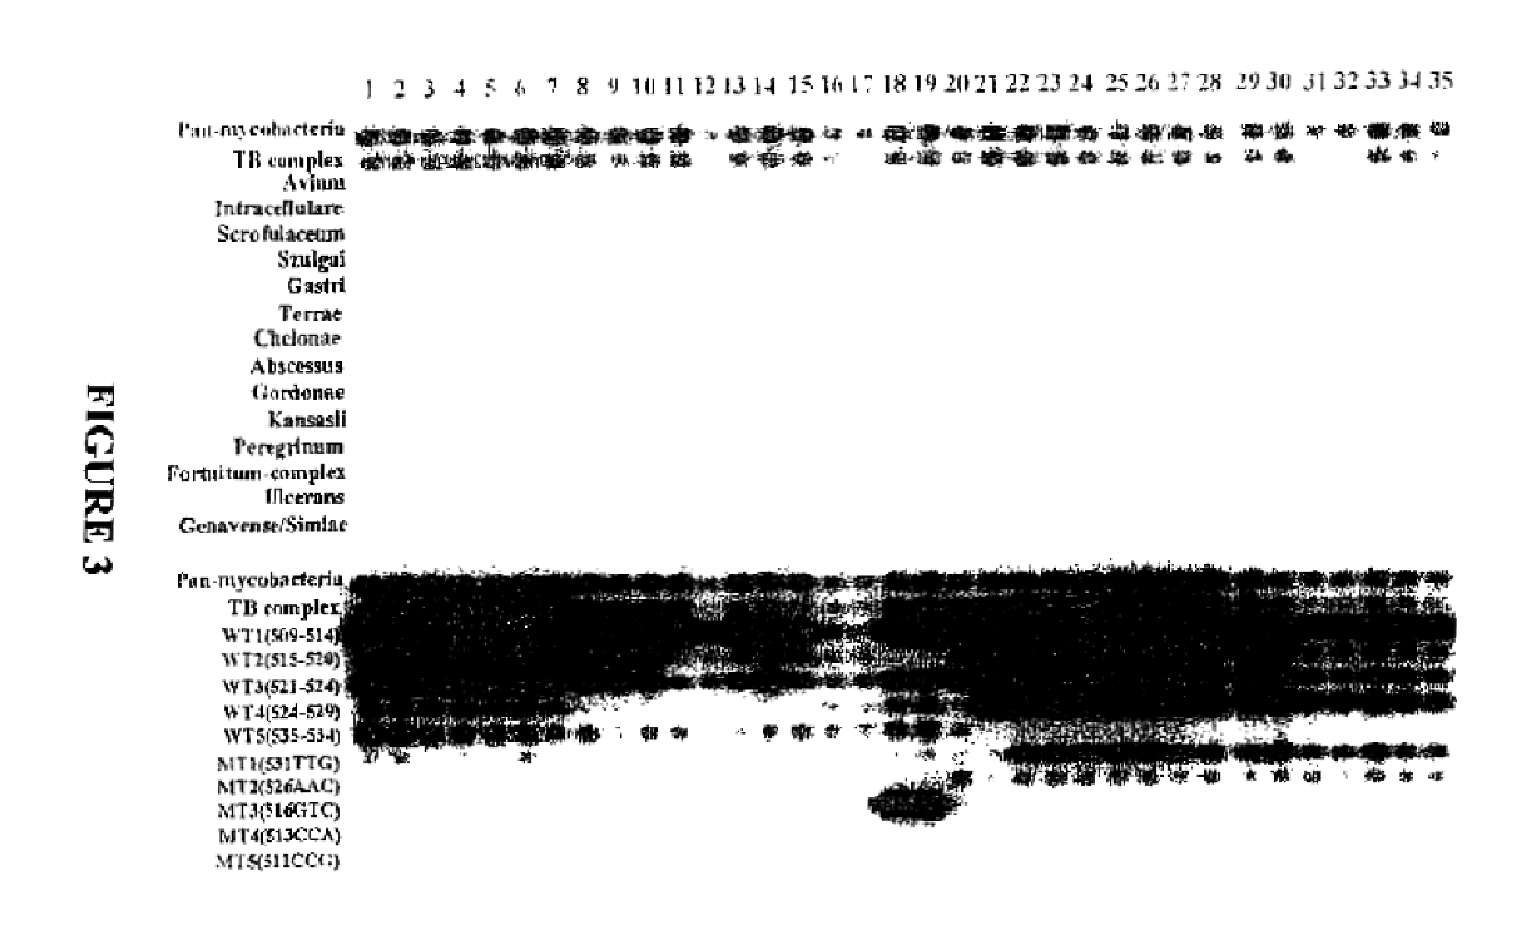 Method for identifying mycobacterium tuberculosis and mycobacteria other than tuberculosis, together with detecting resistance to an antituberculosis drug of mycobacteria obtained by mutation of rpob gene